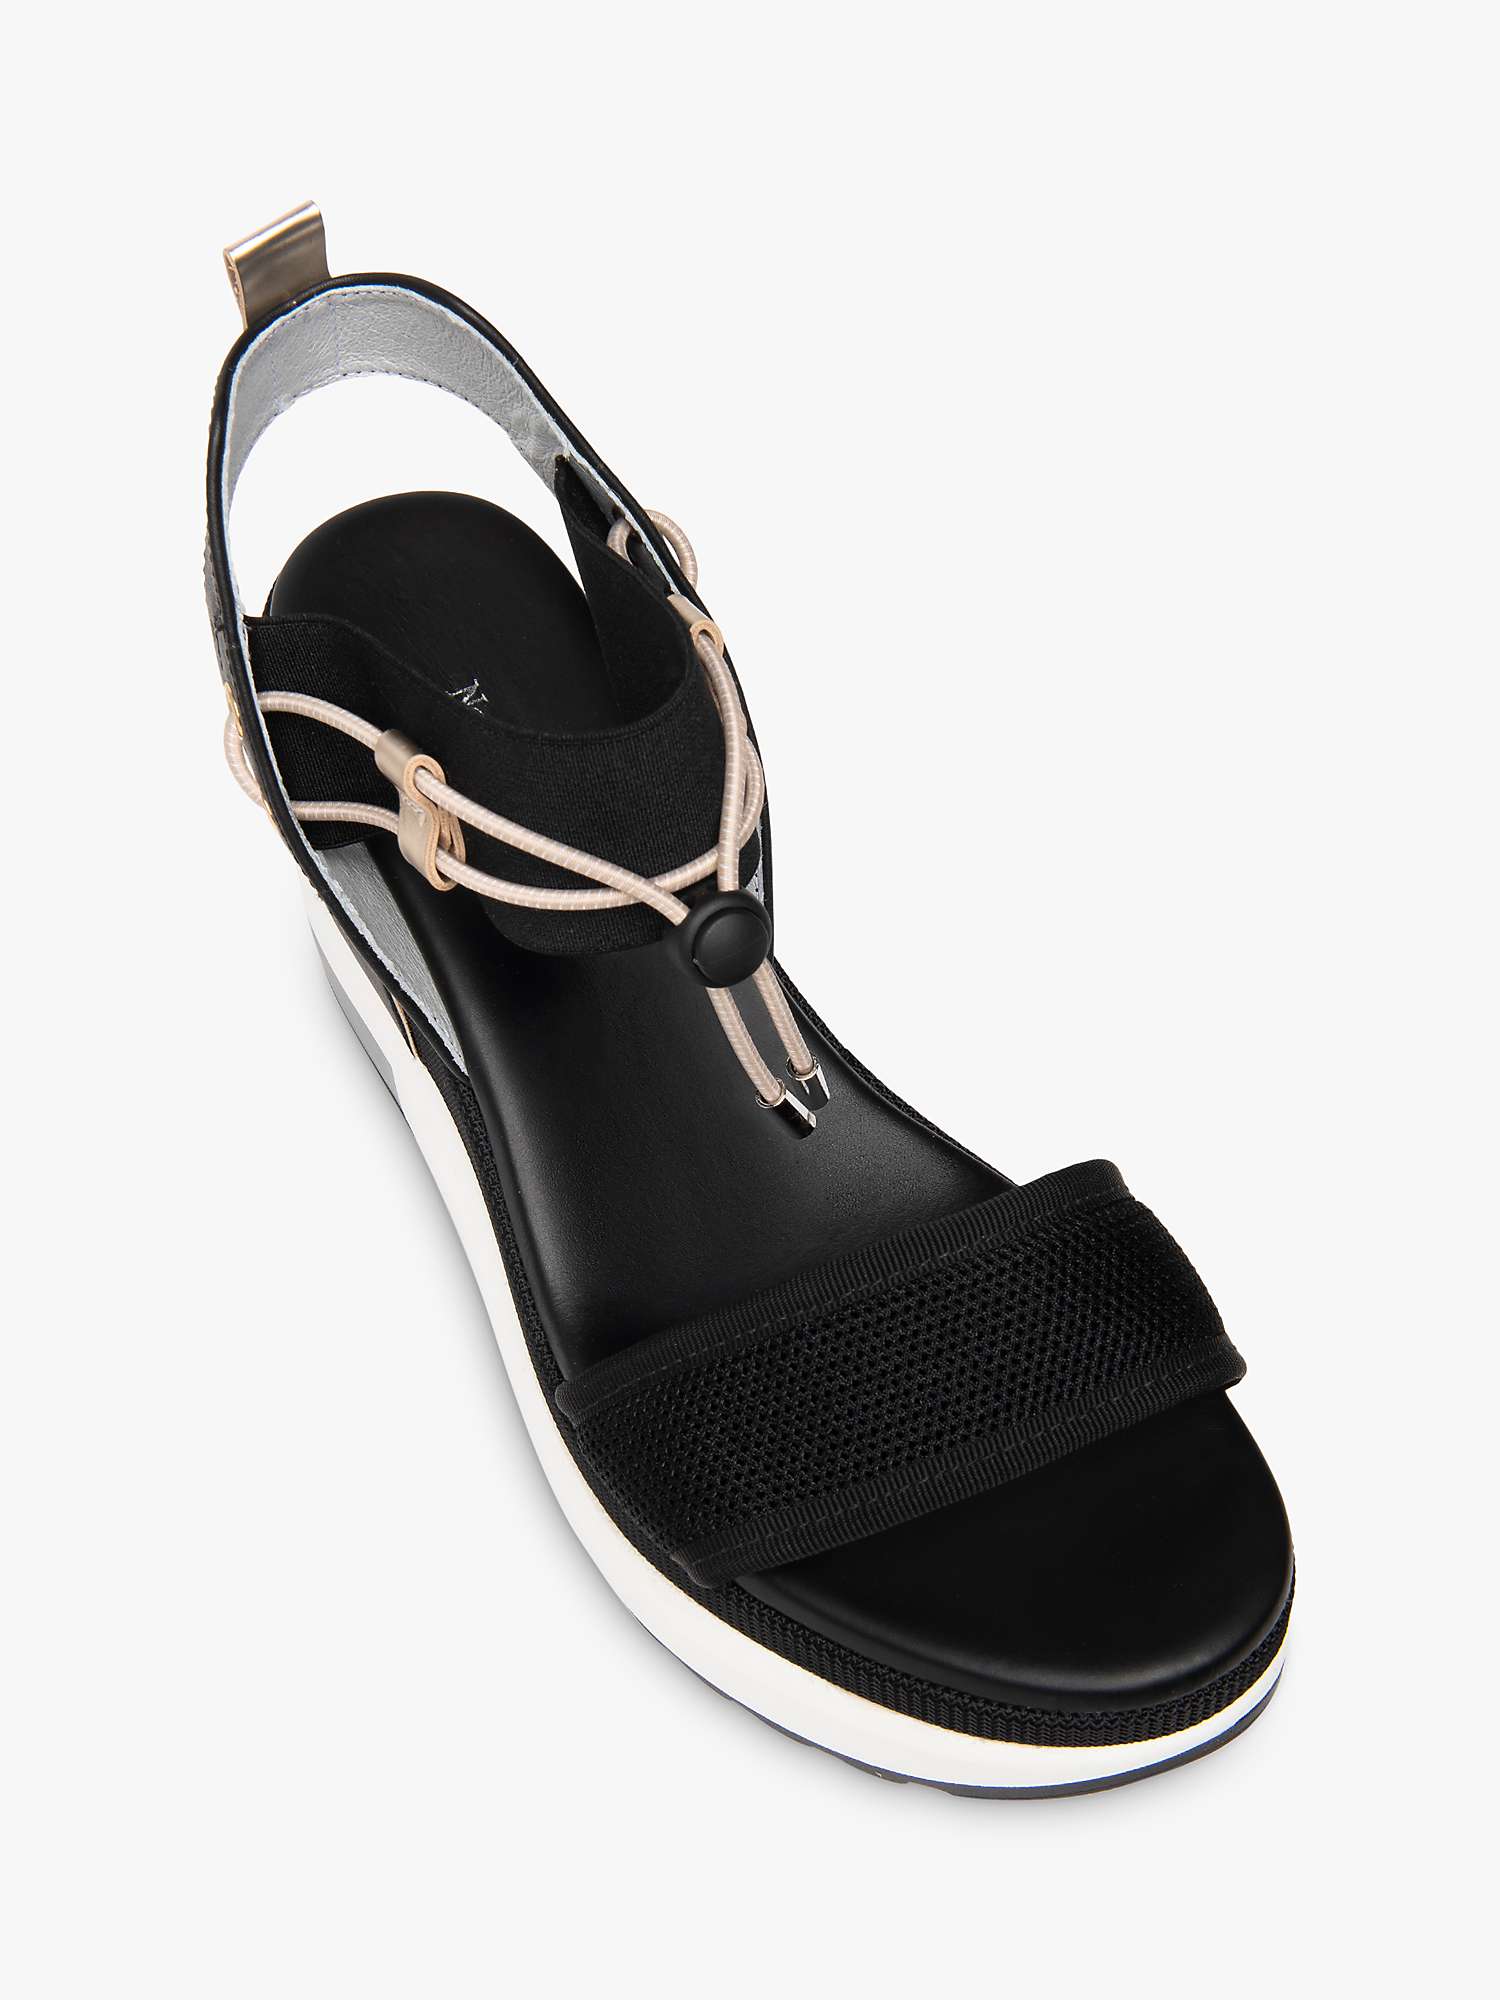 Buy NeroGiardini Leather Sports Wedge Sandals Online at johnlewis.com